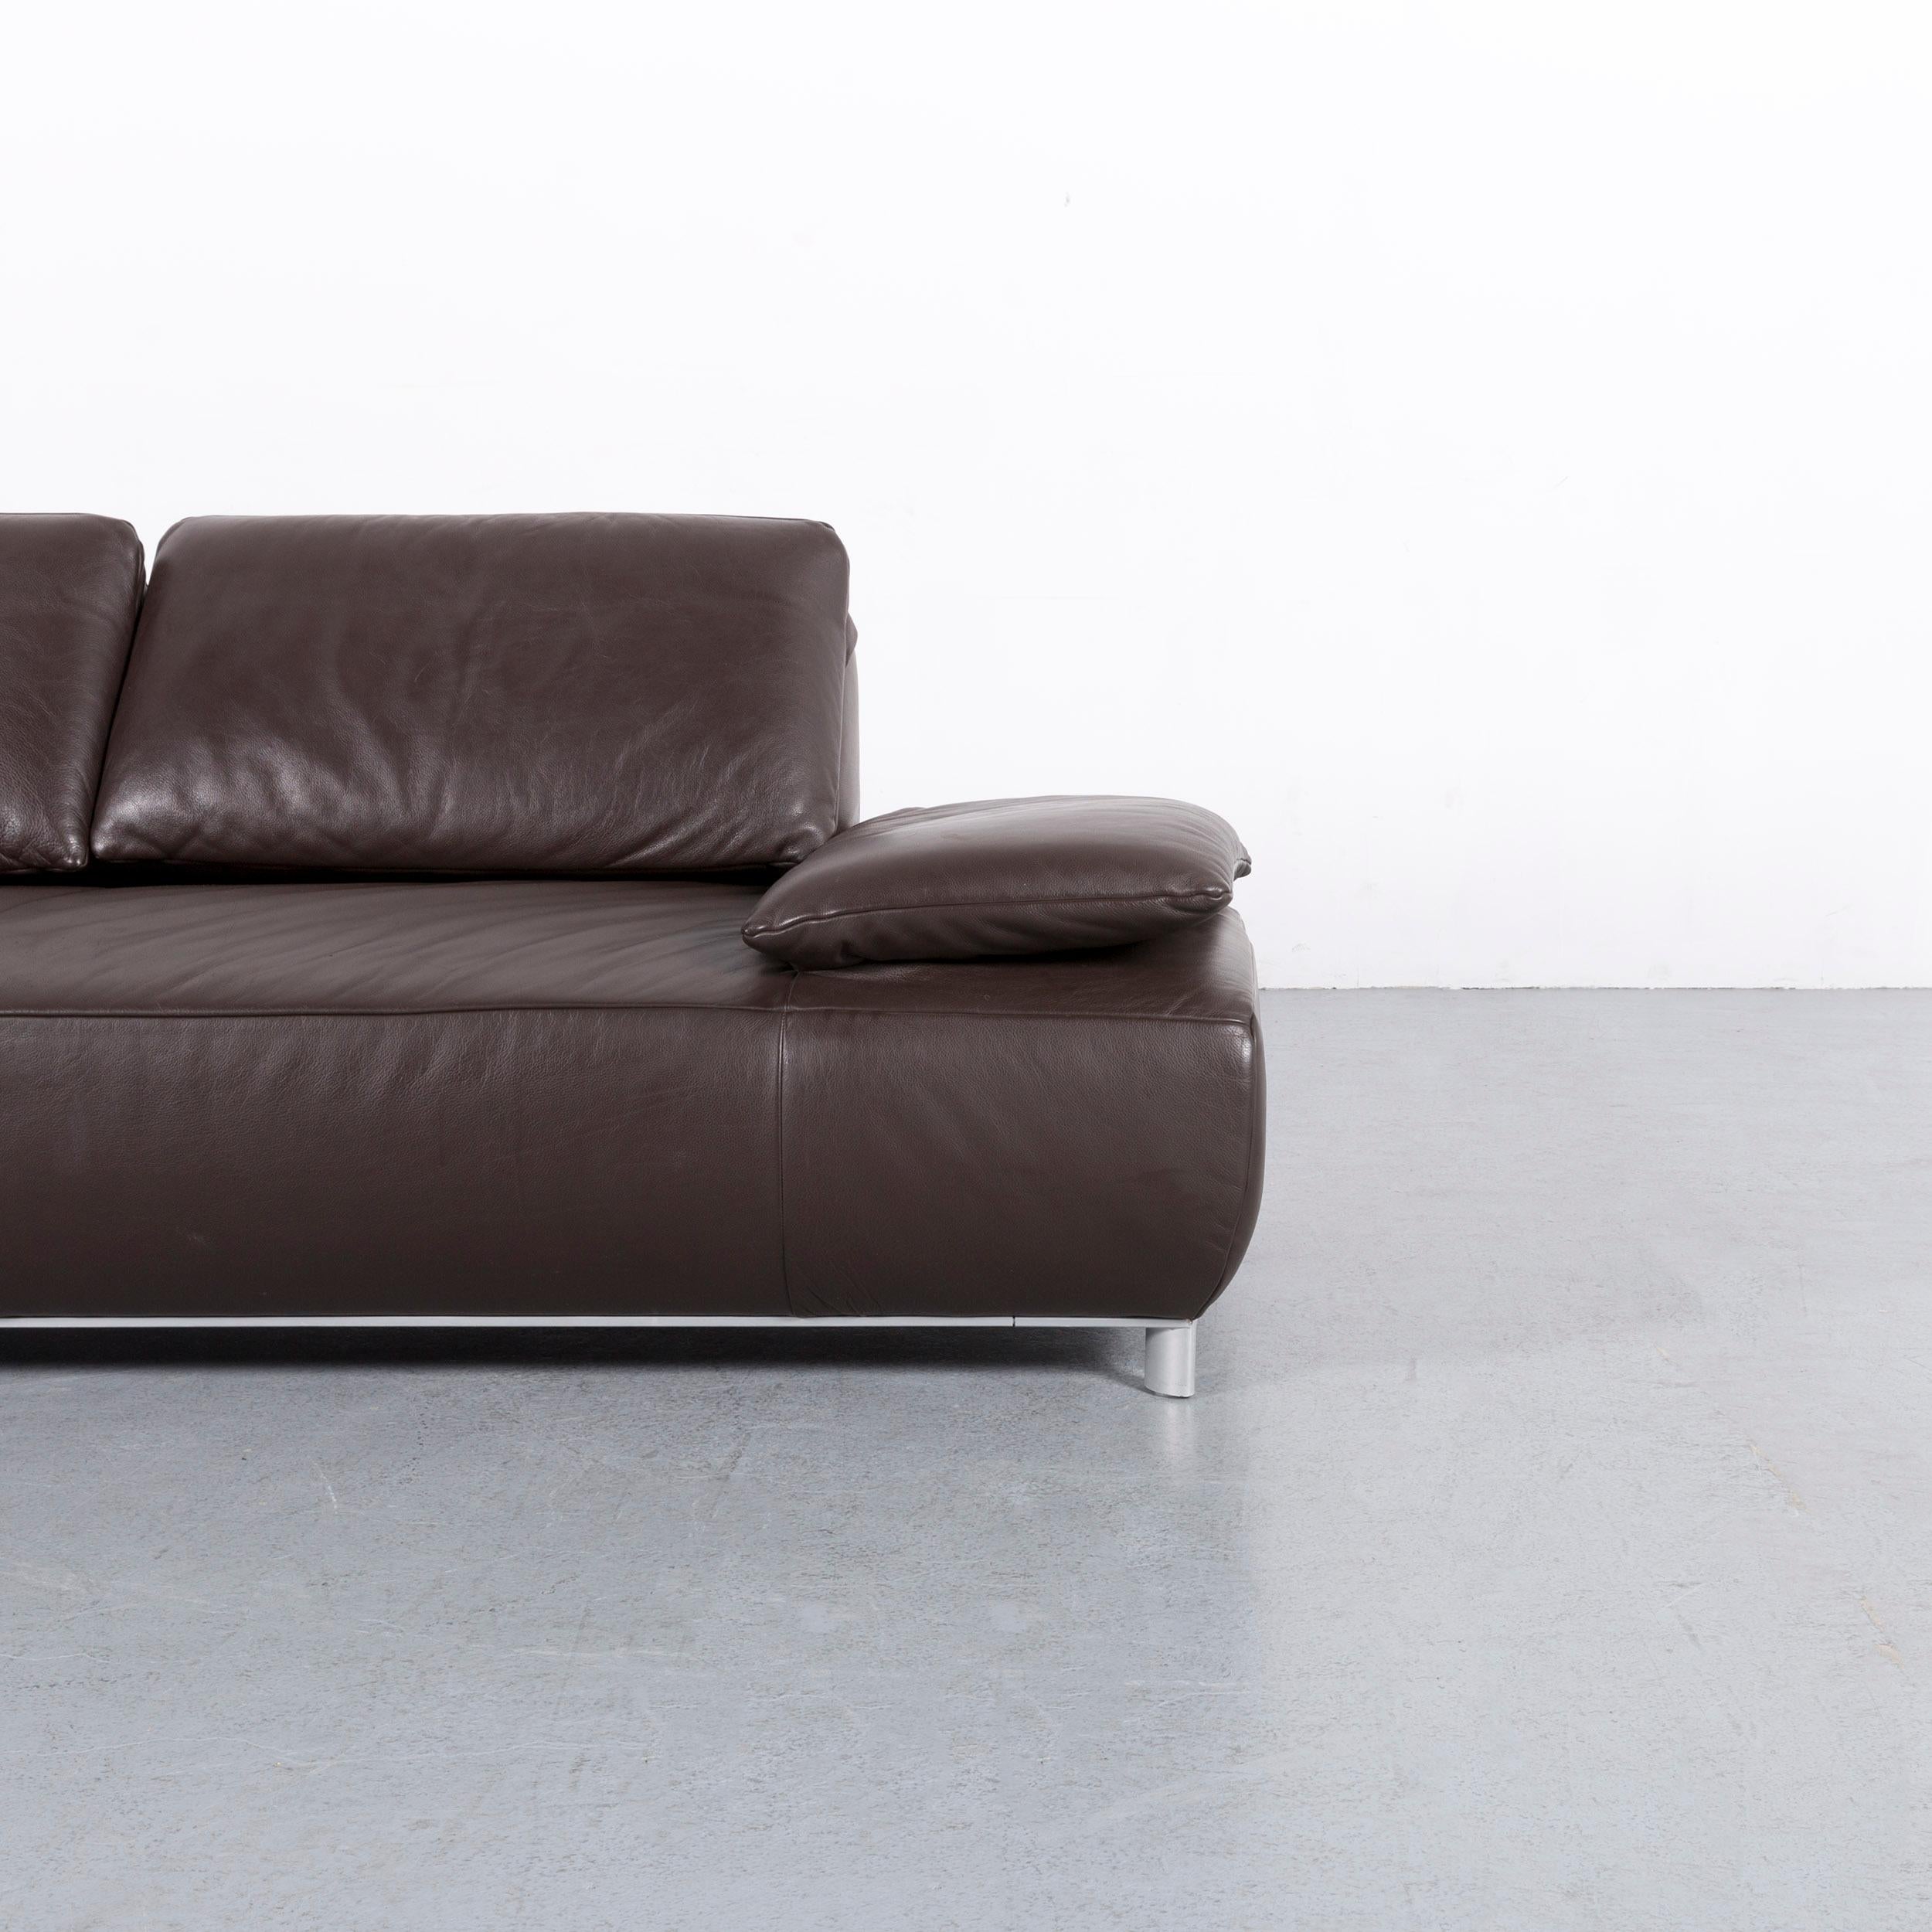 German Koinor Volare Leather Sofa Brown Three-Seat Couch